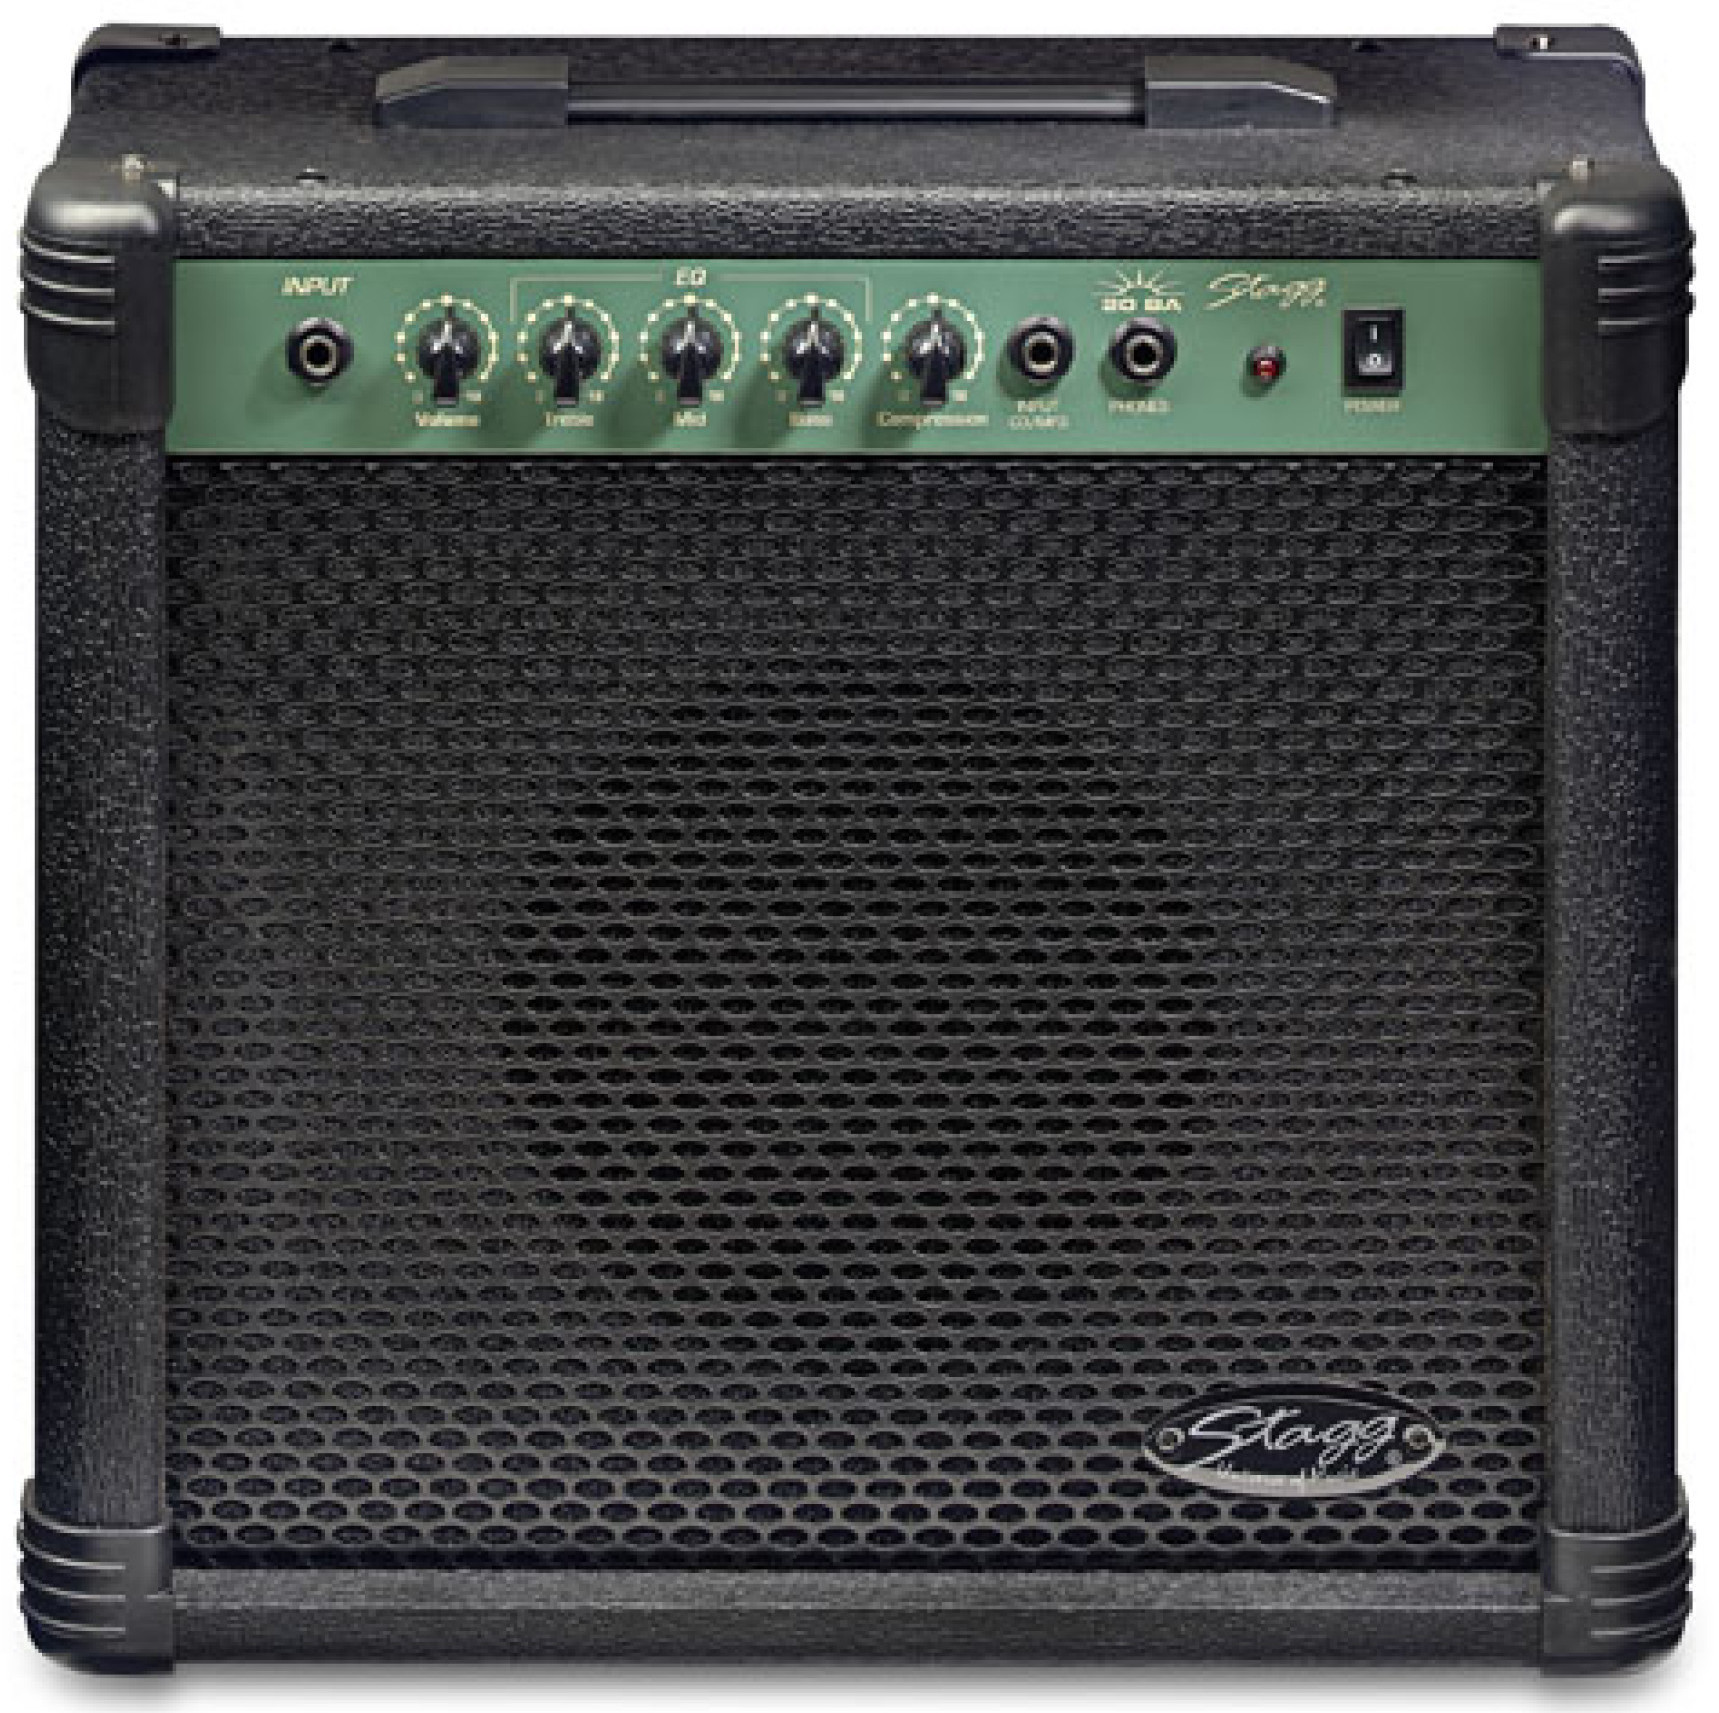 Stagg 20 W RMS Bass Combo Amplifier